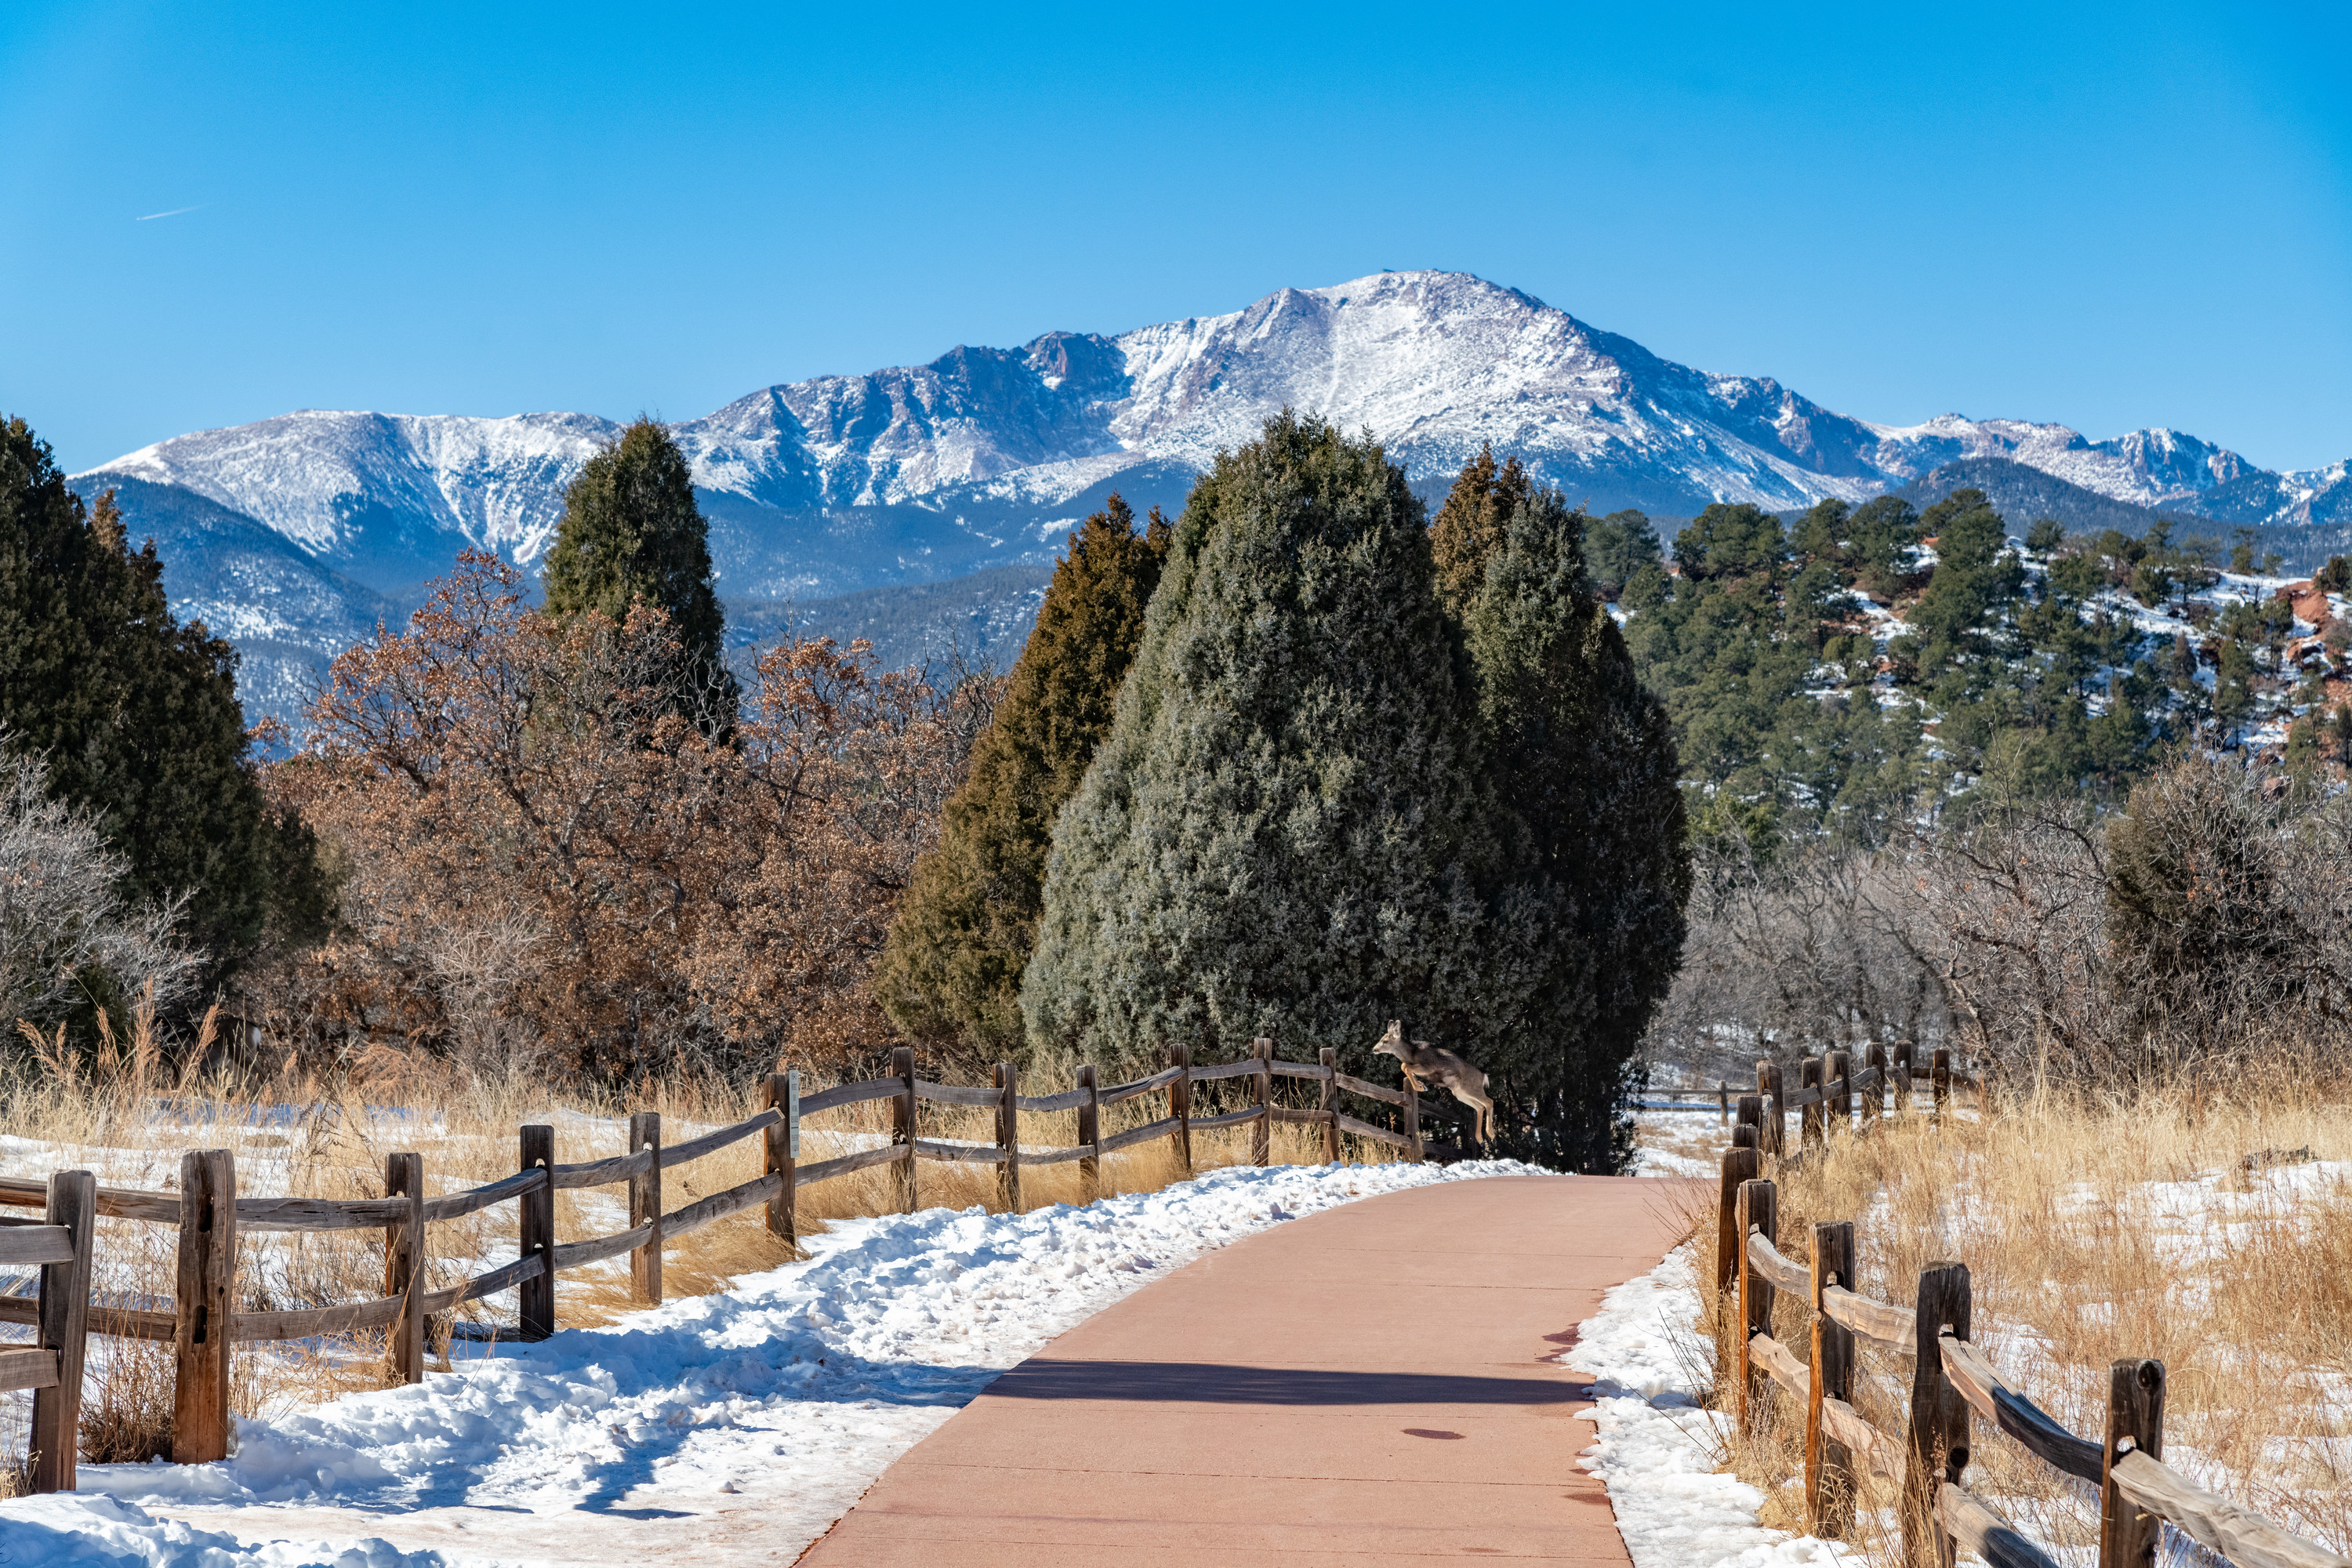 A view of the Rocky Mountains in Colorado Springs, CO, taken on a walking path with pine trees